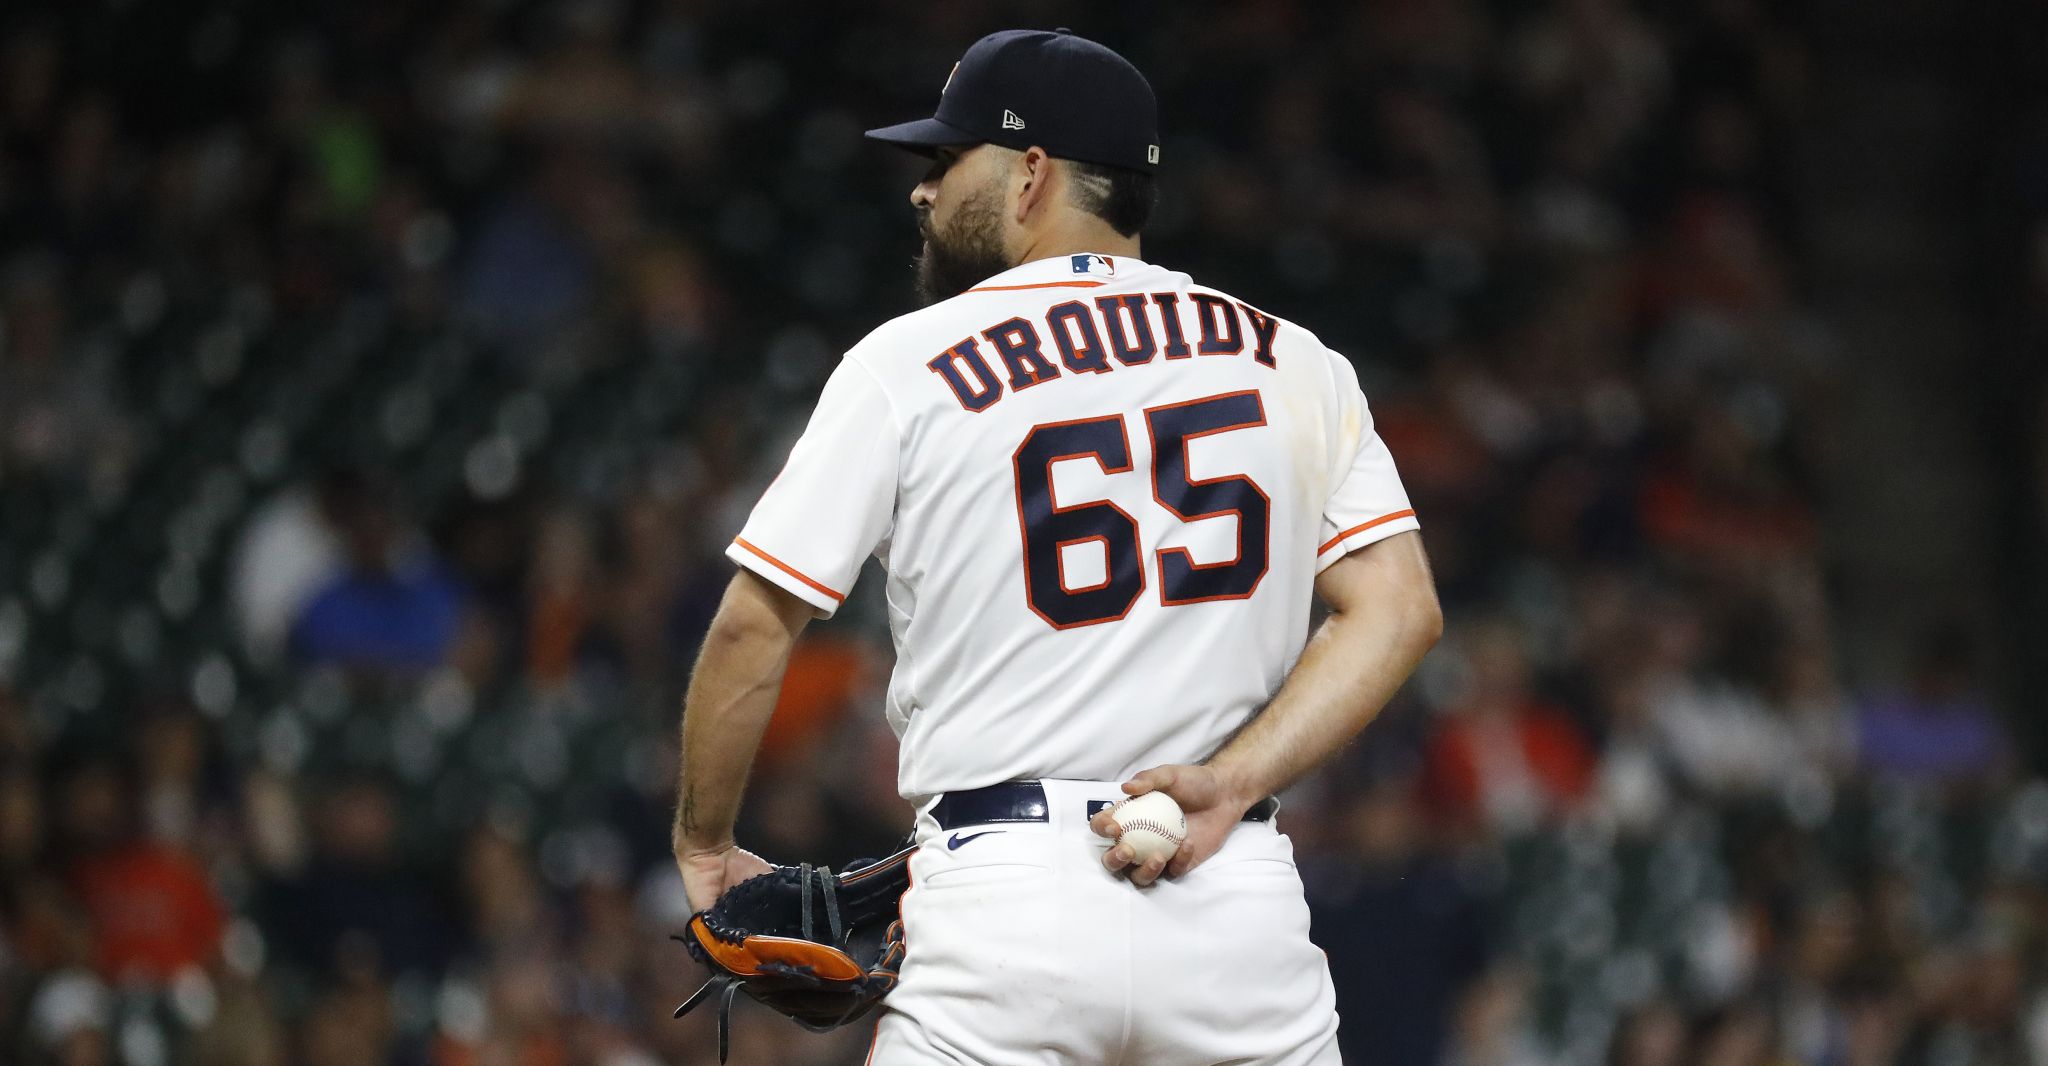 José Urquidy Keeps the Twins' Bats Quiet as the Astros Advance to the ALCS